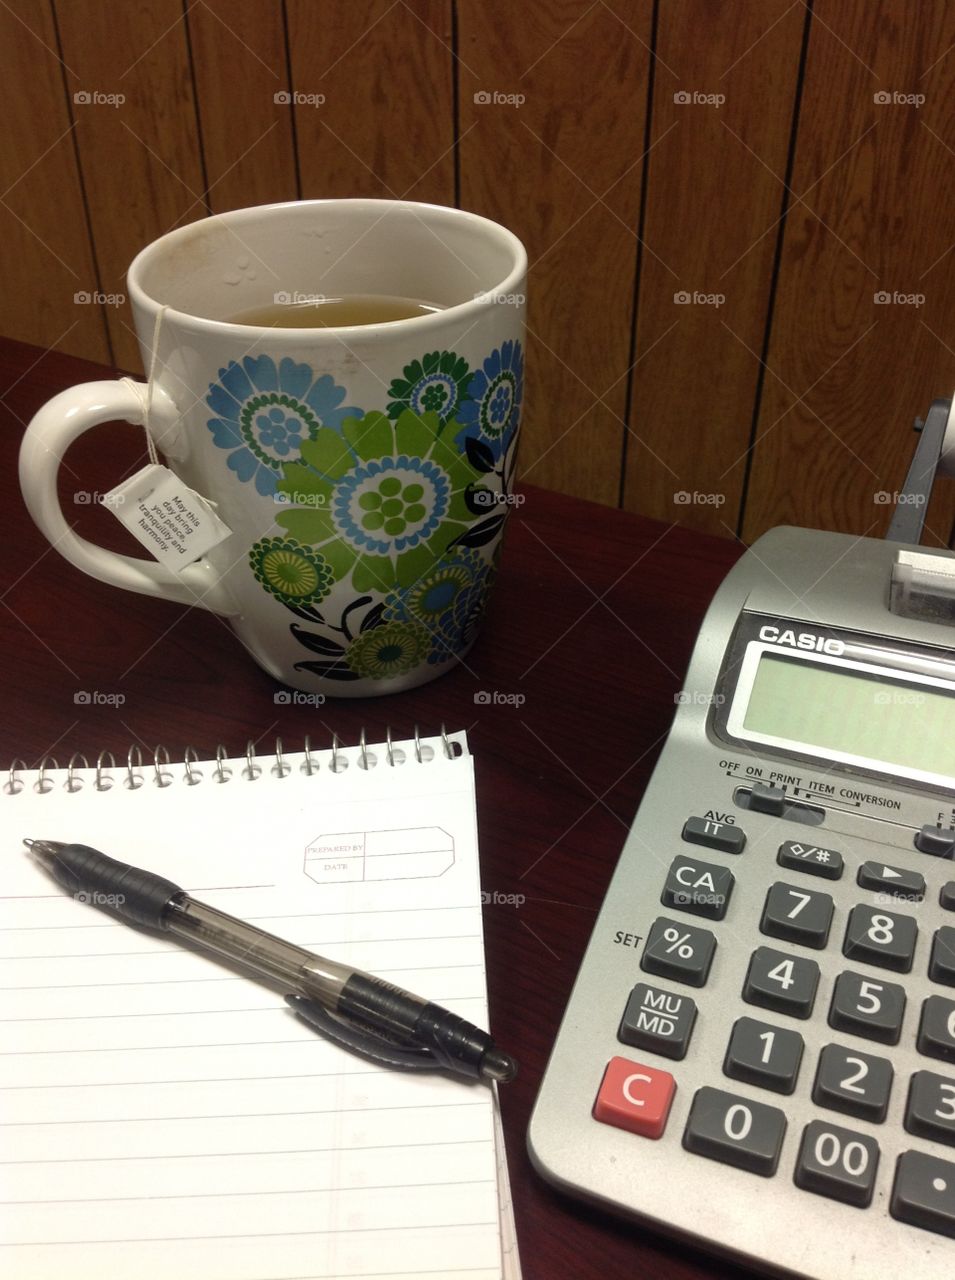 Time to crunch the numbers with green tea